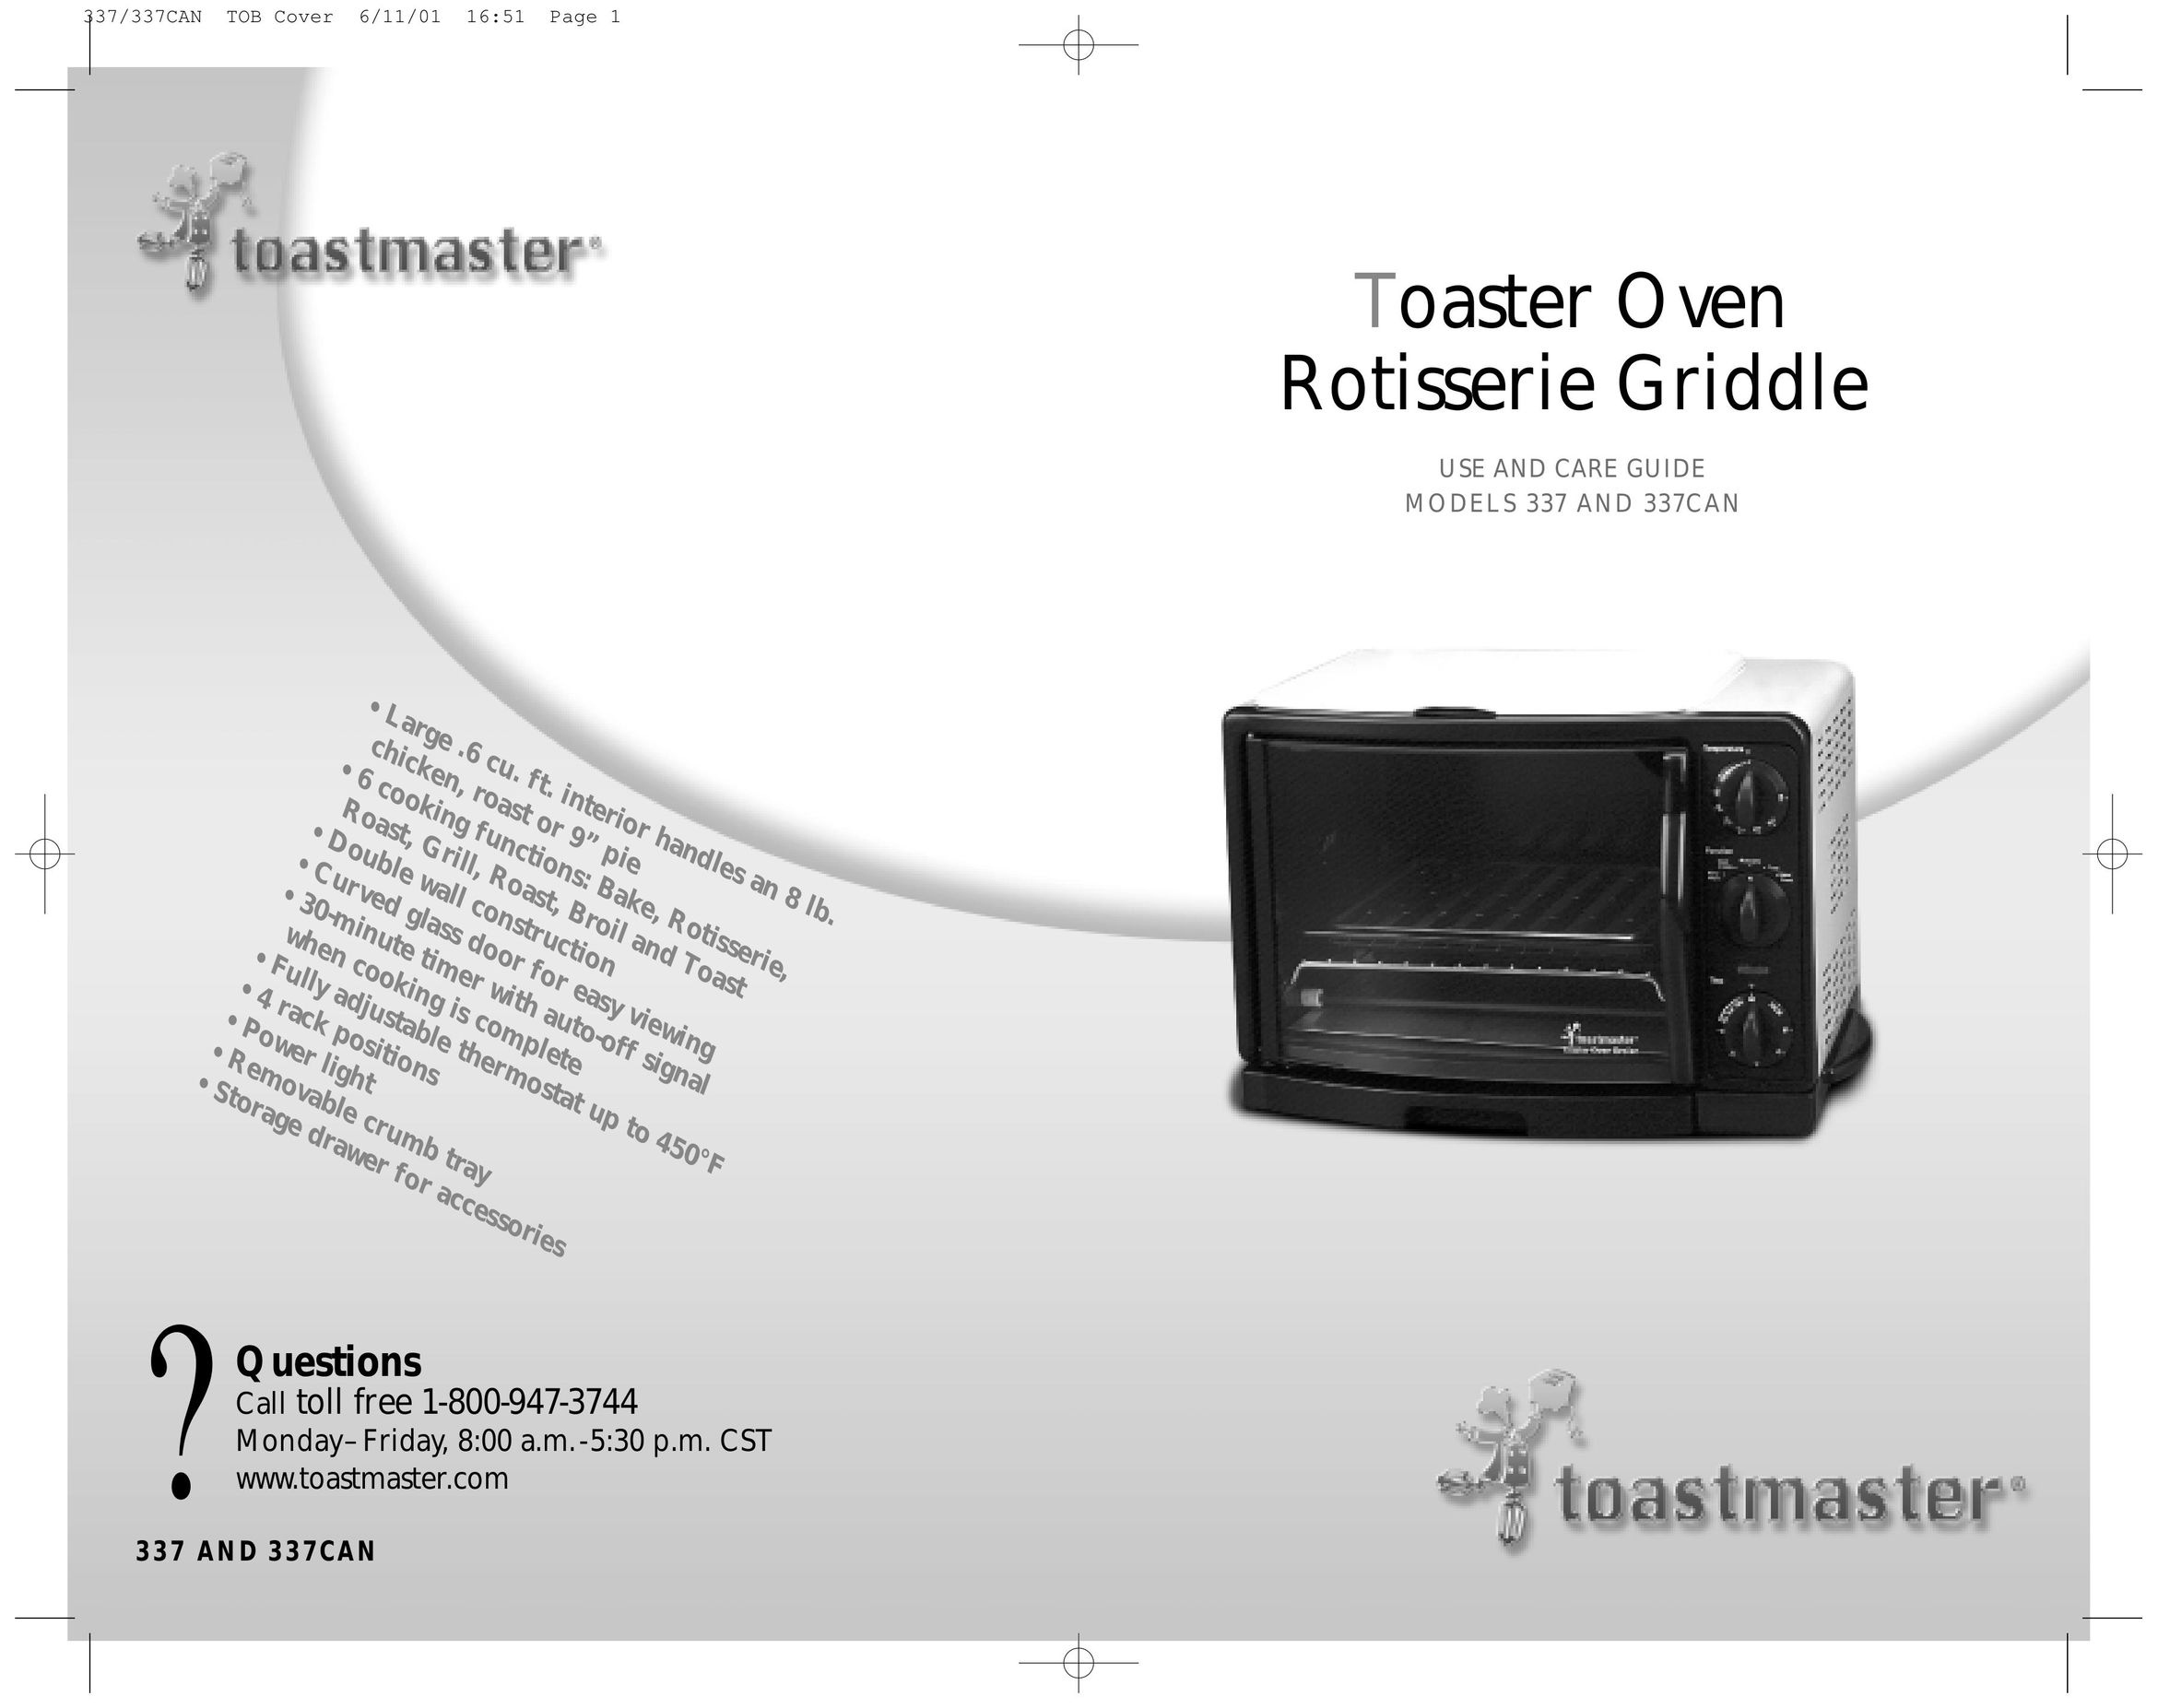 Toastmaster 337CAN Oven User Manual